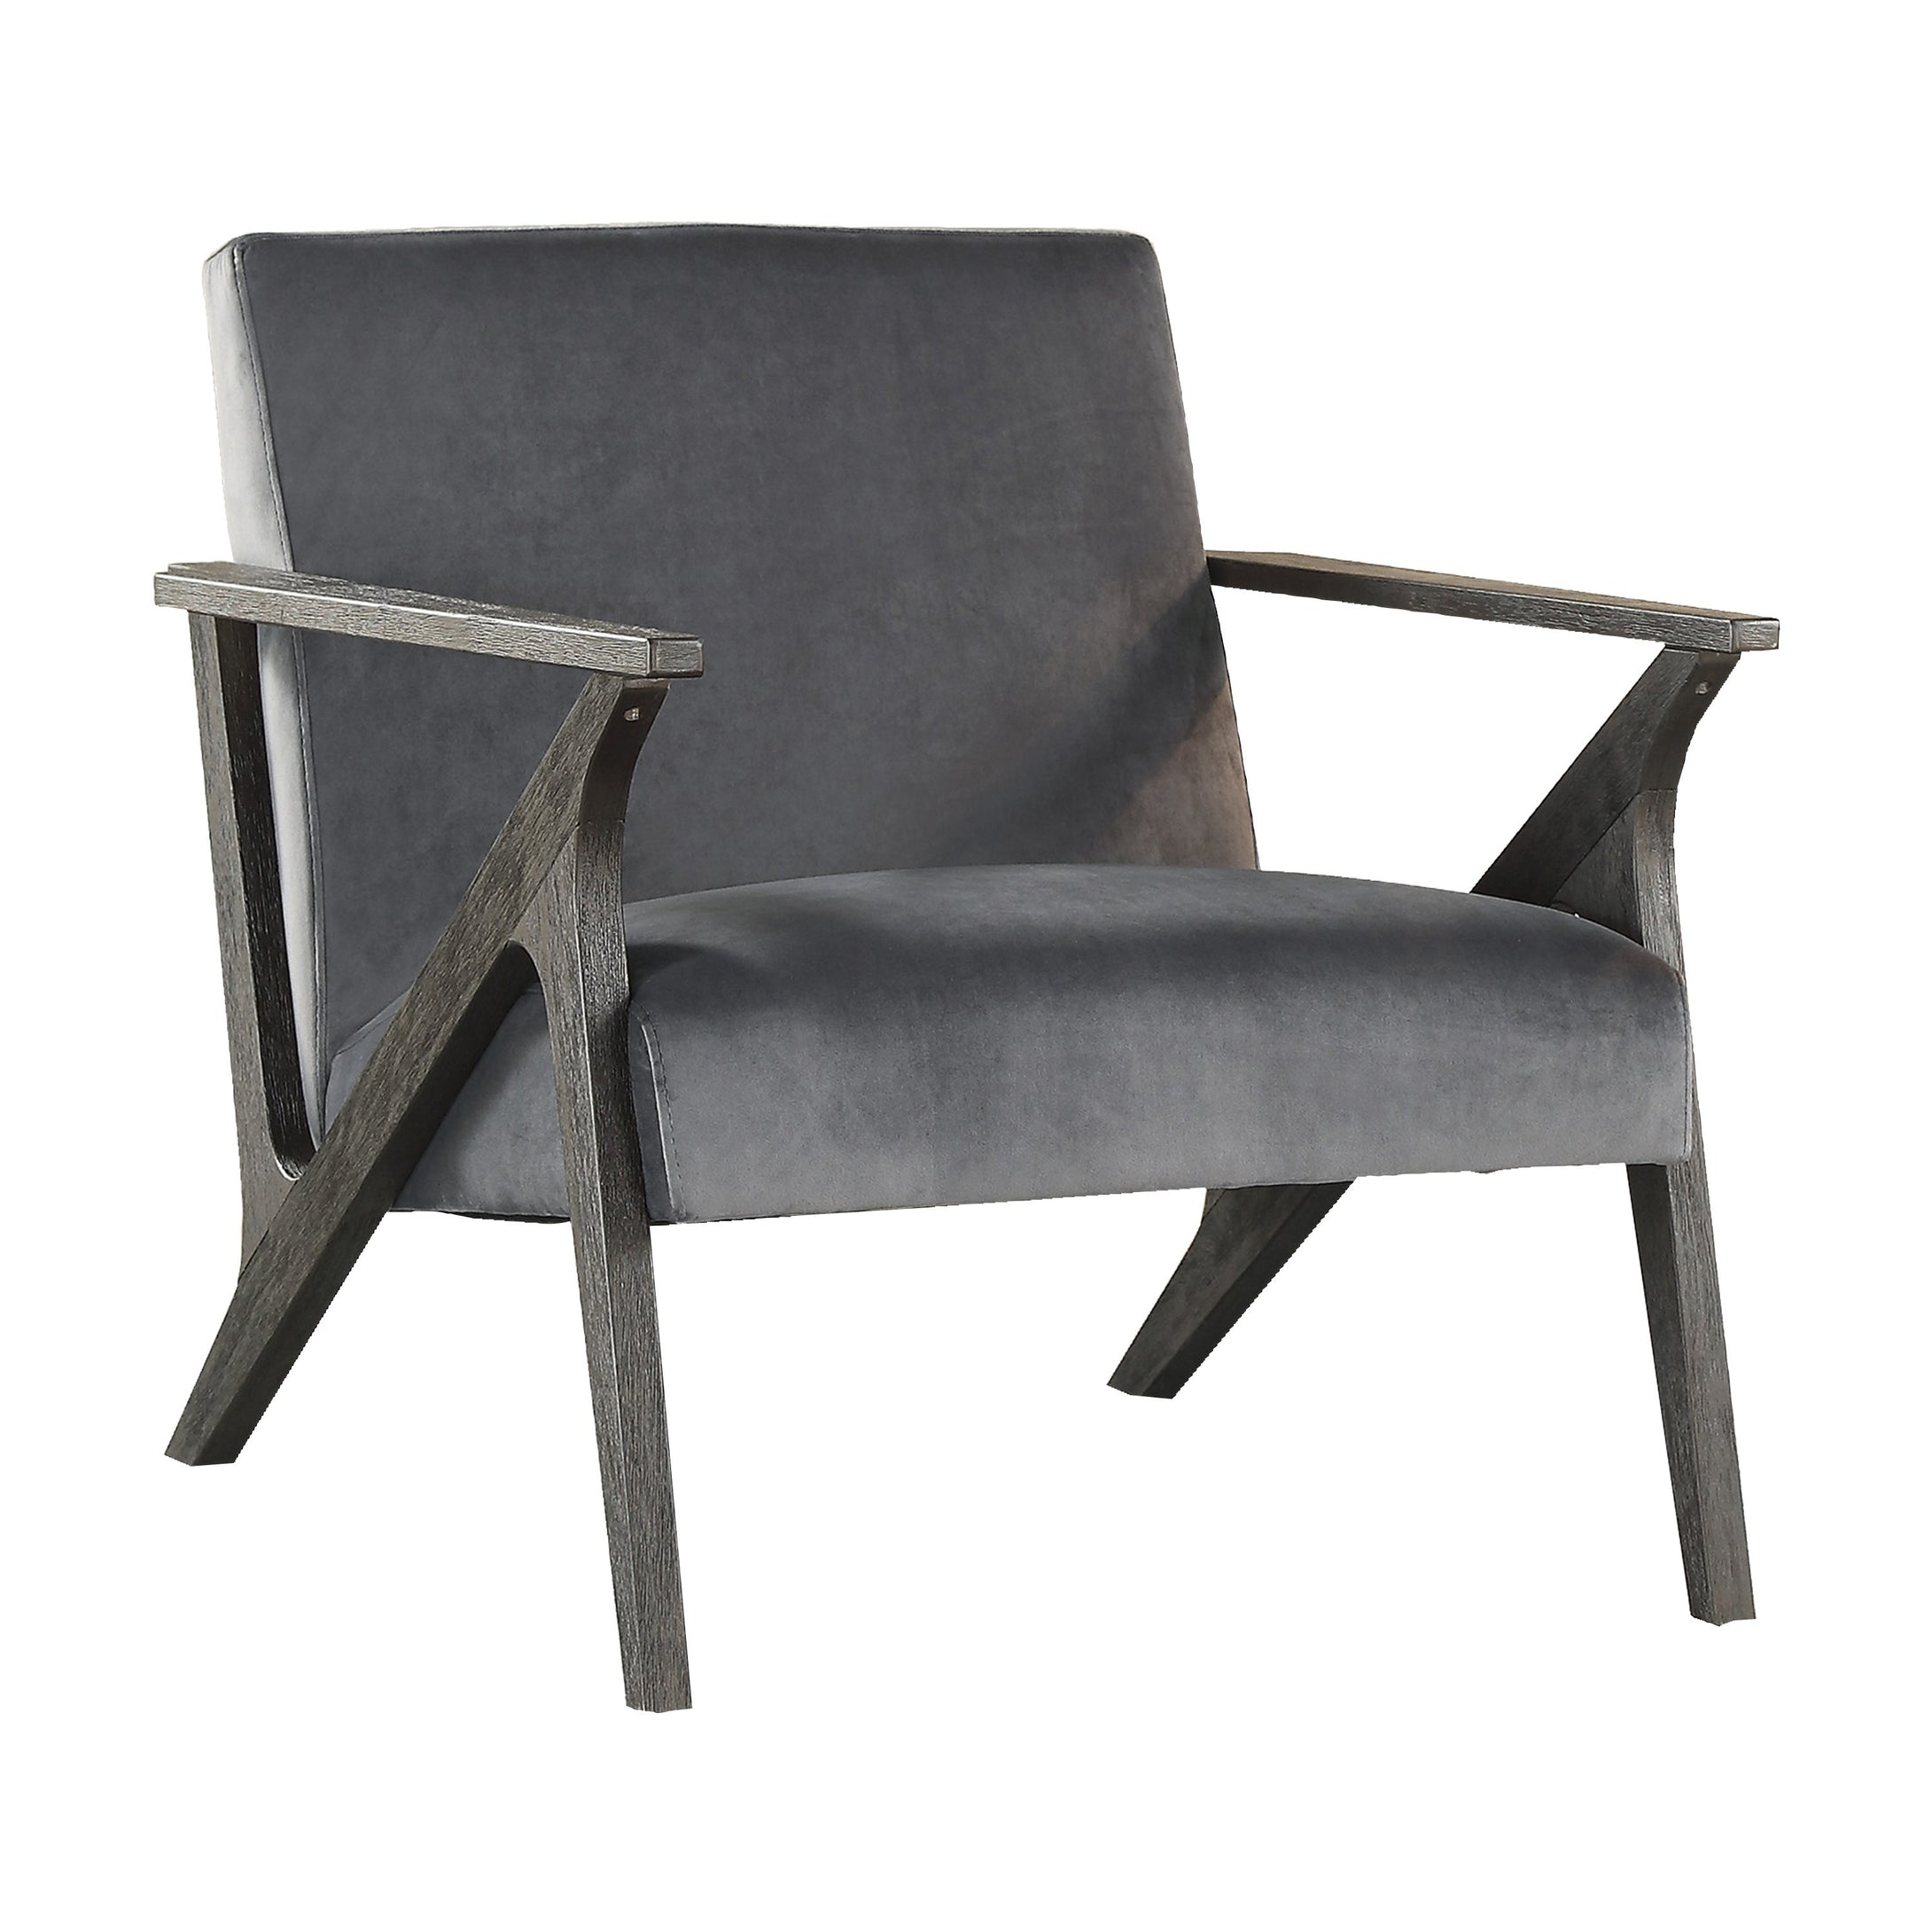 1111GY-1 Accent Chair